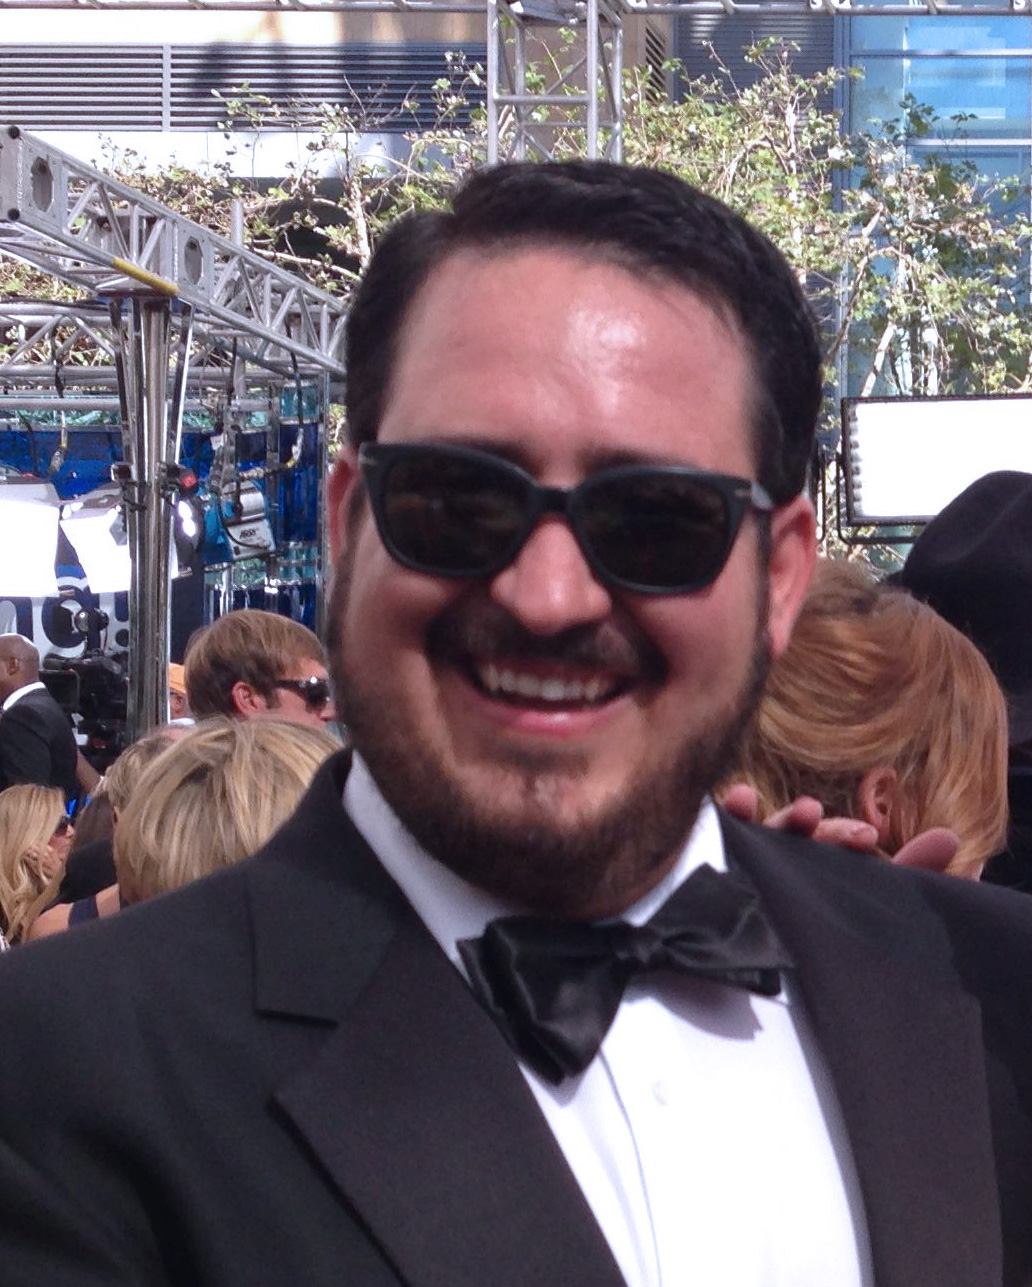 At the 2013 Primetime Emmys